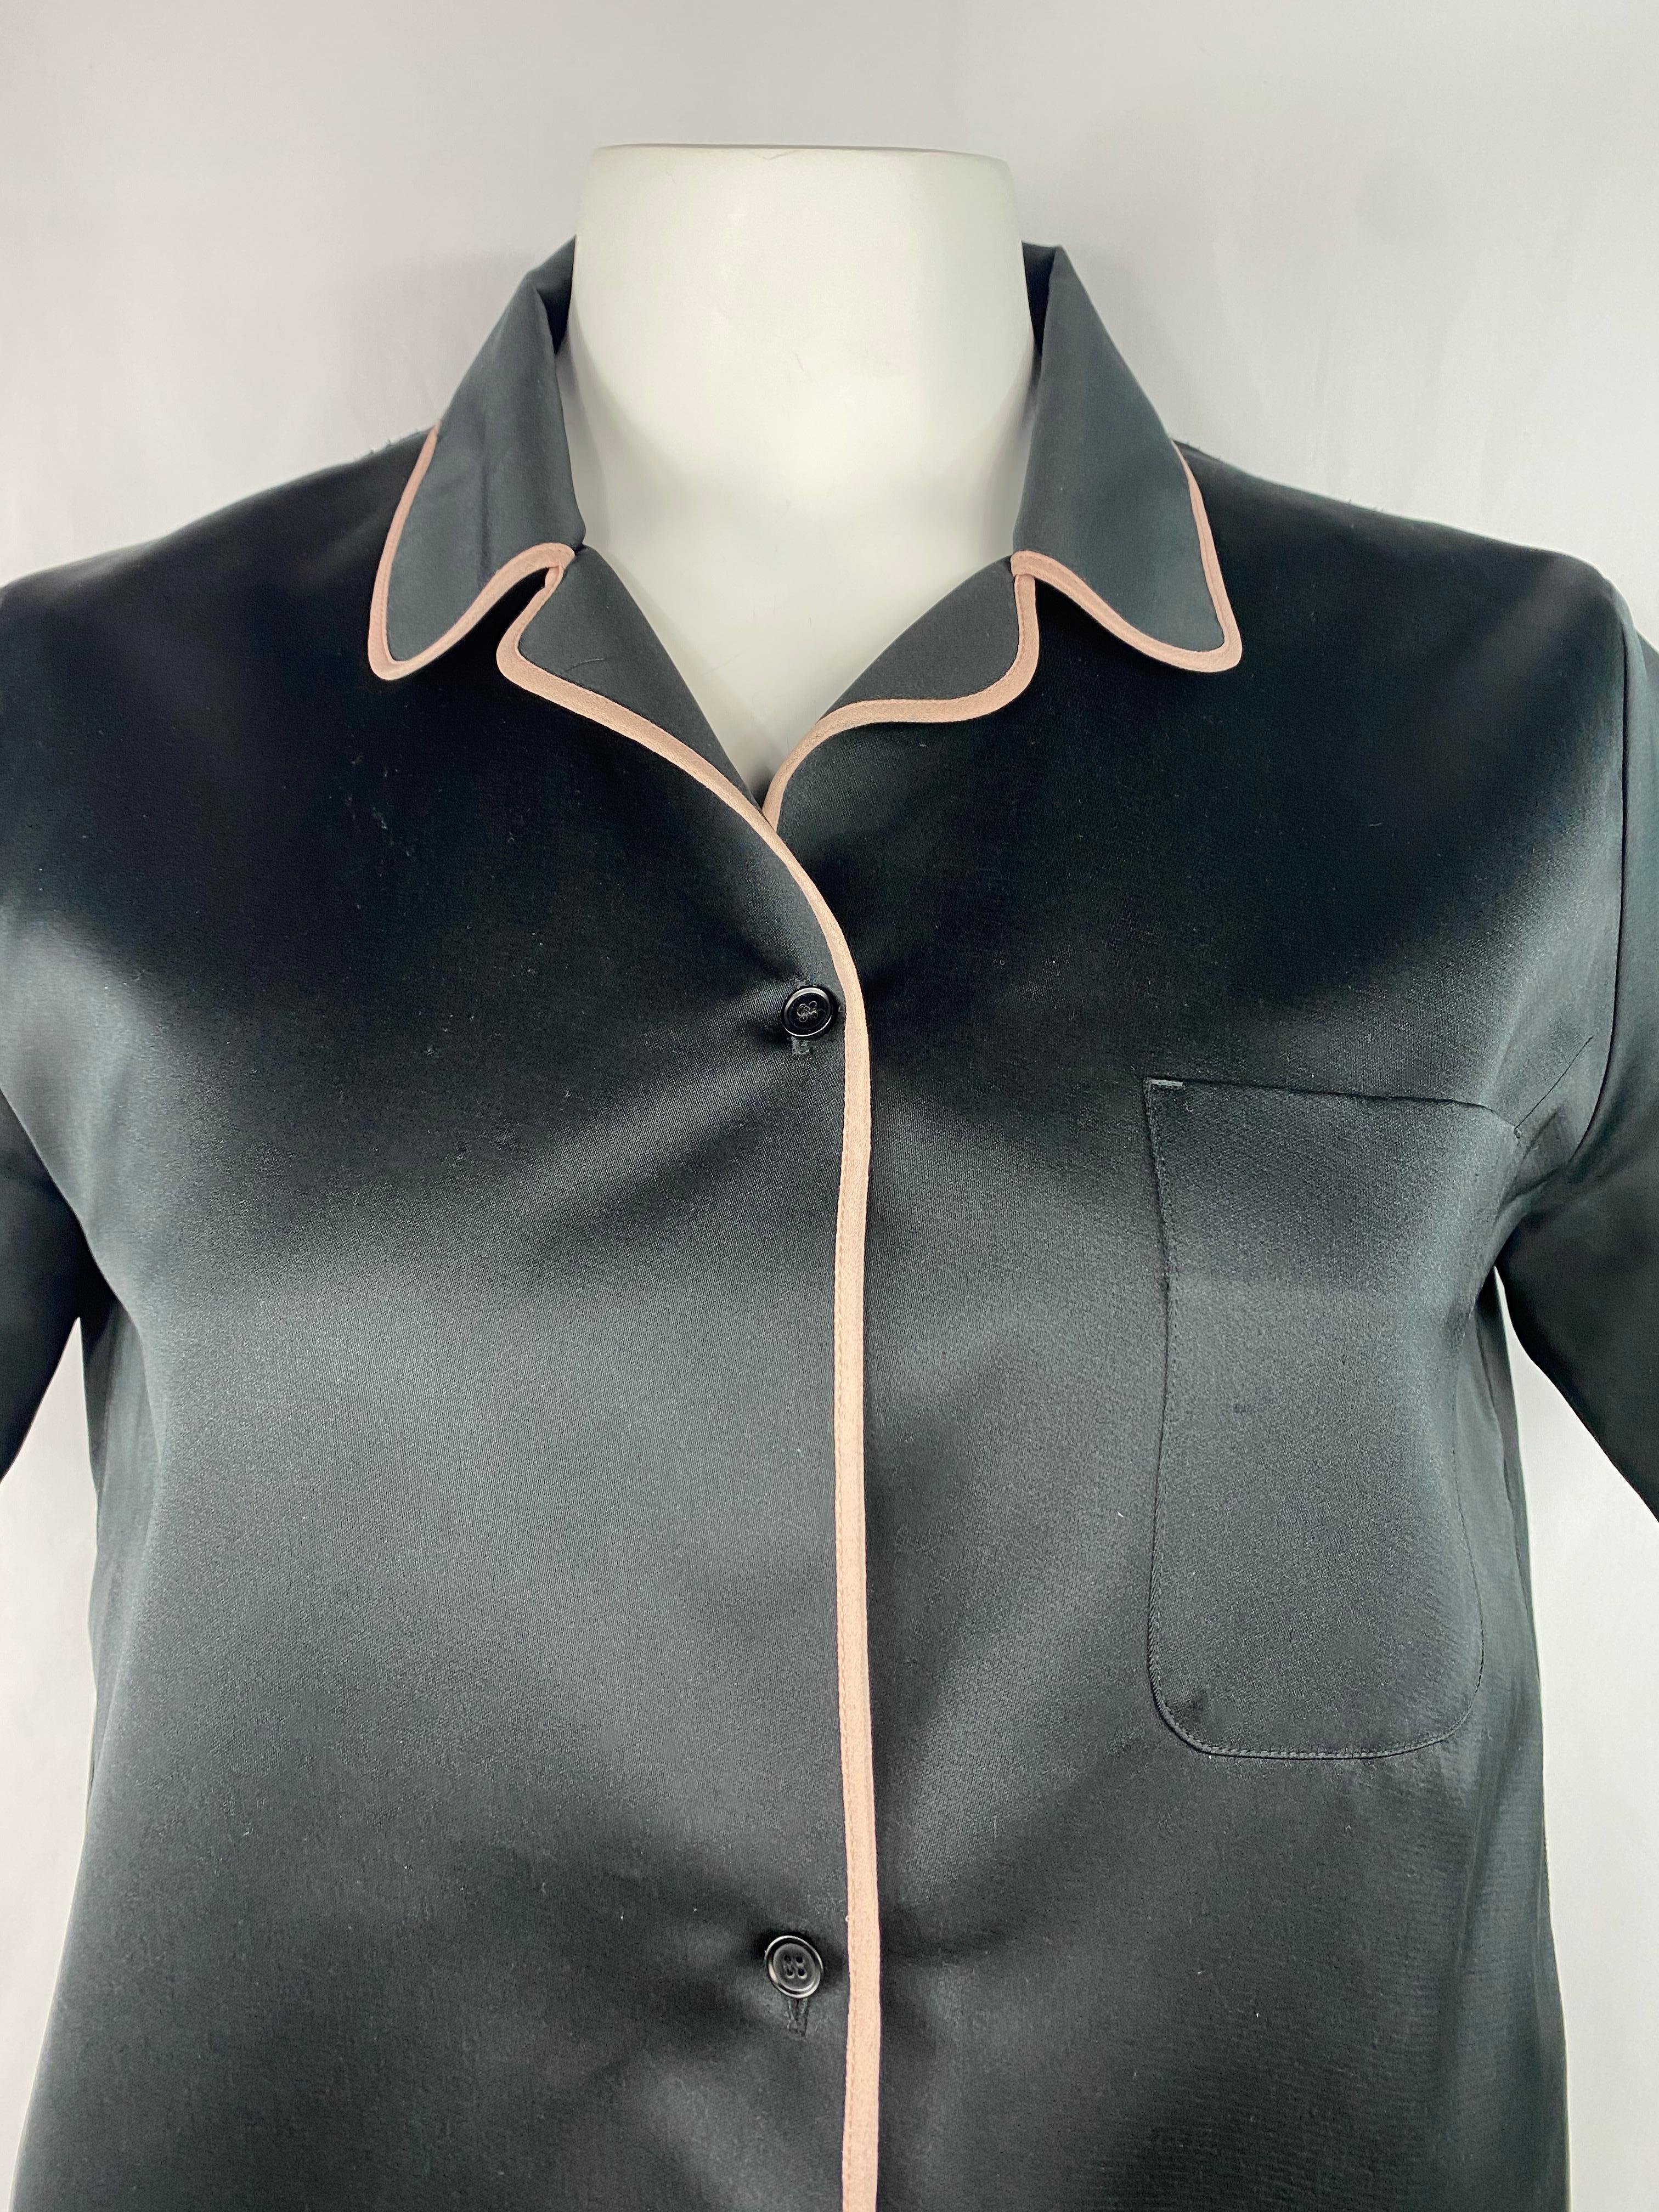 Product details:

The shirt features cream/ peach/ light pink trimming, collar, three front buttons closure and side pocket detail.
Made in Italy.